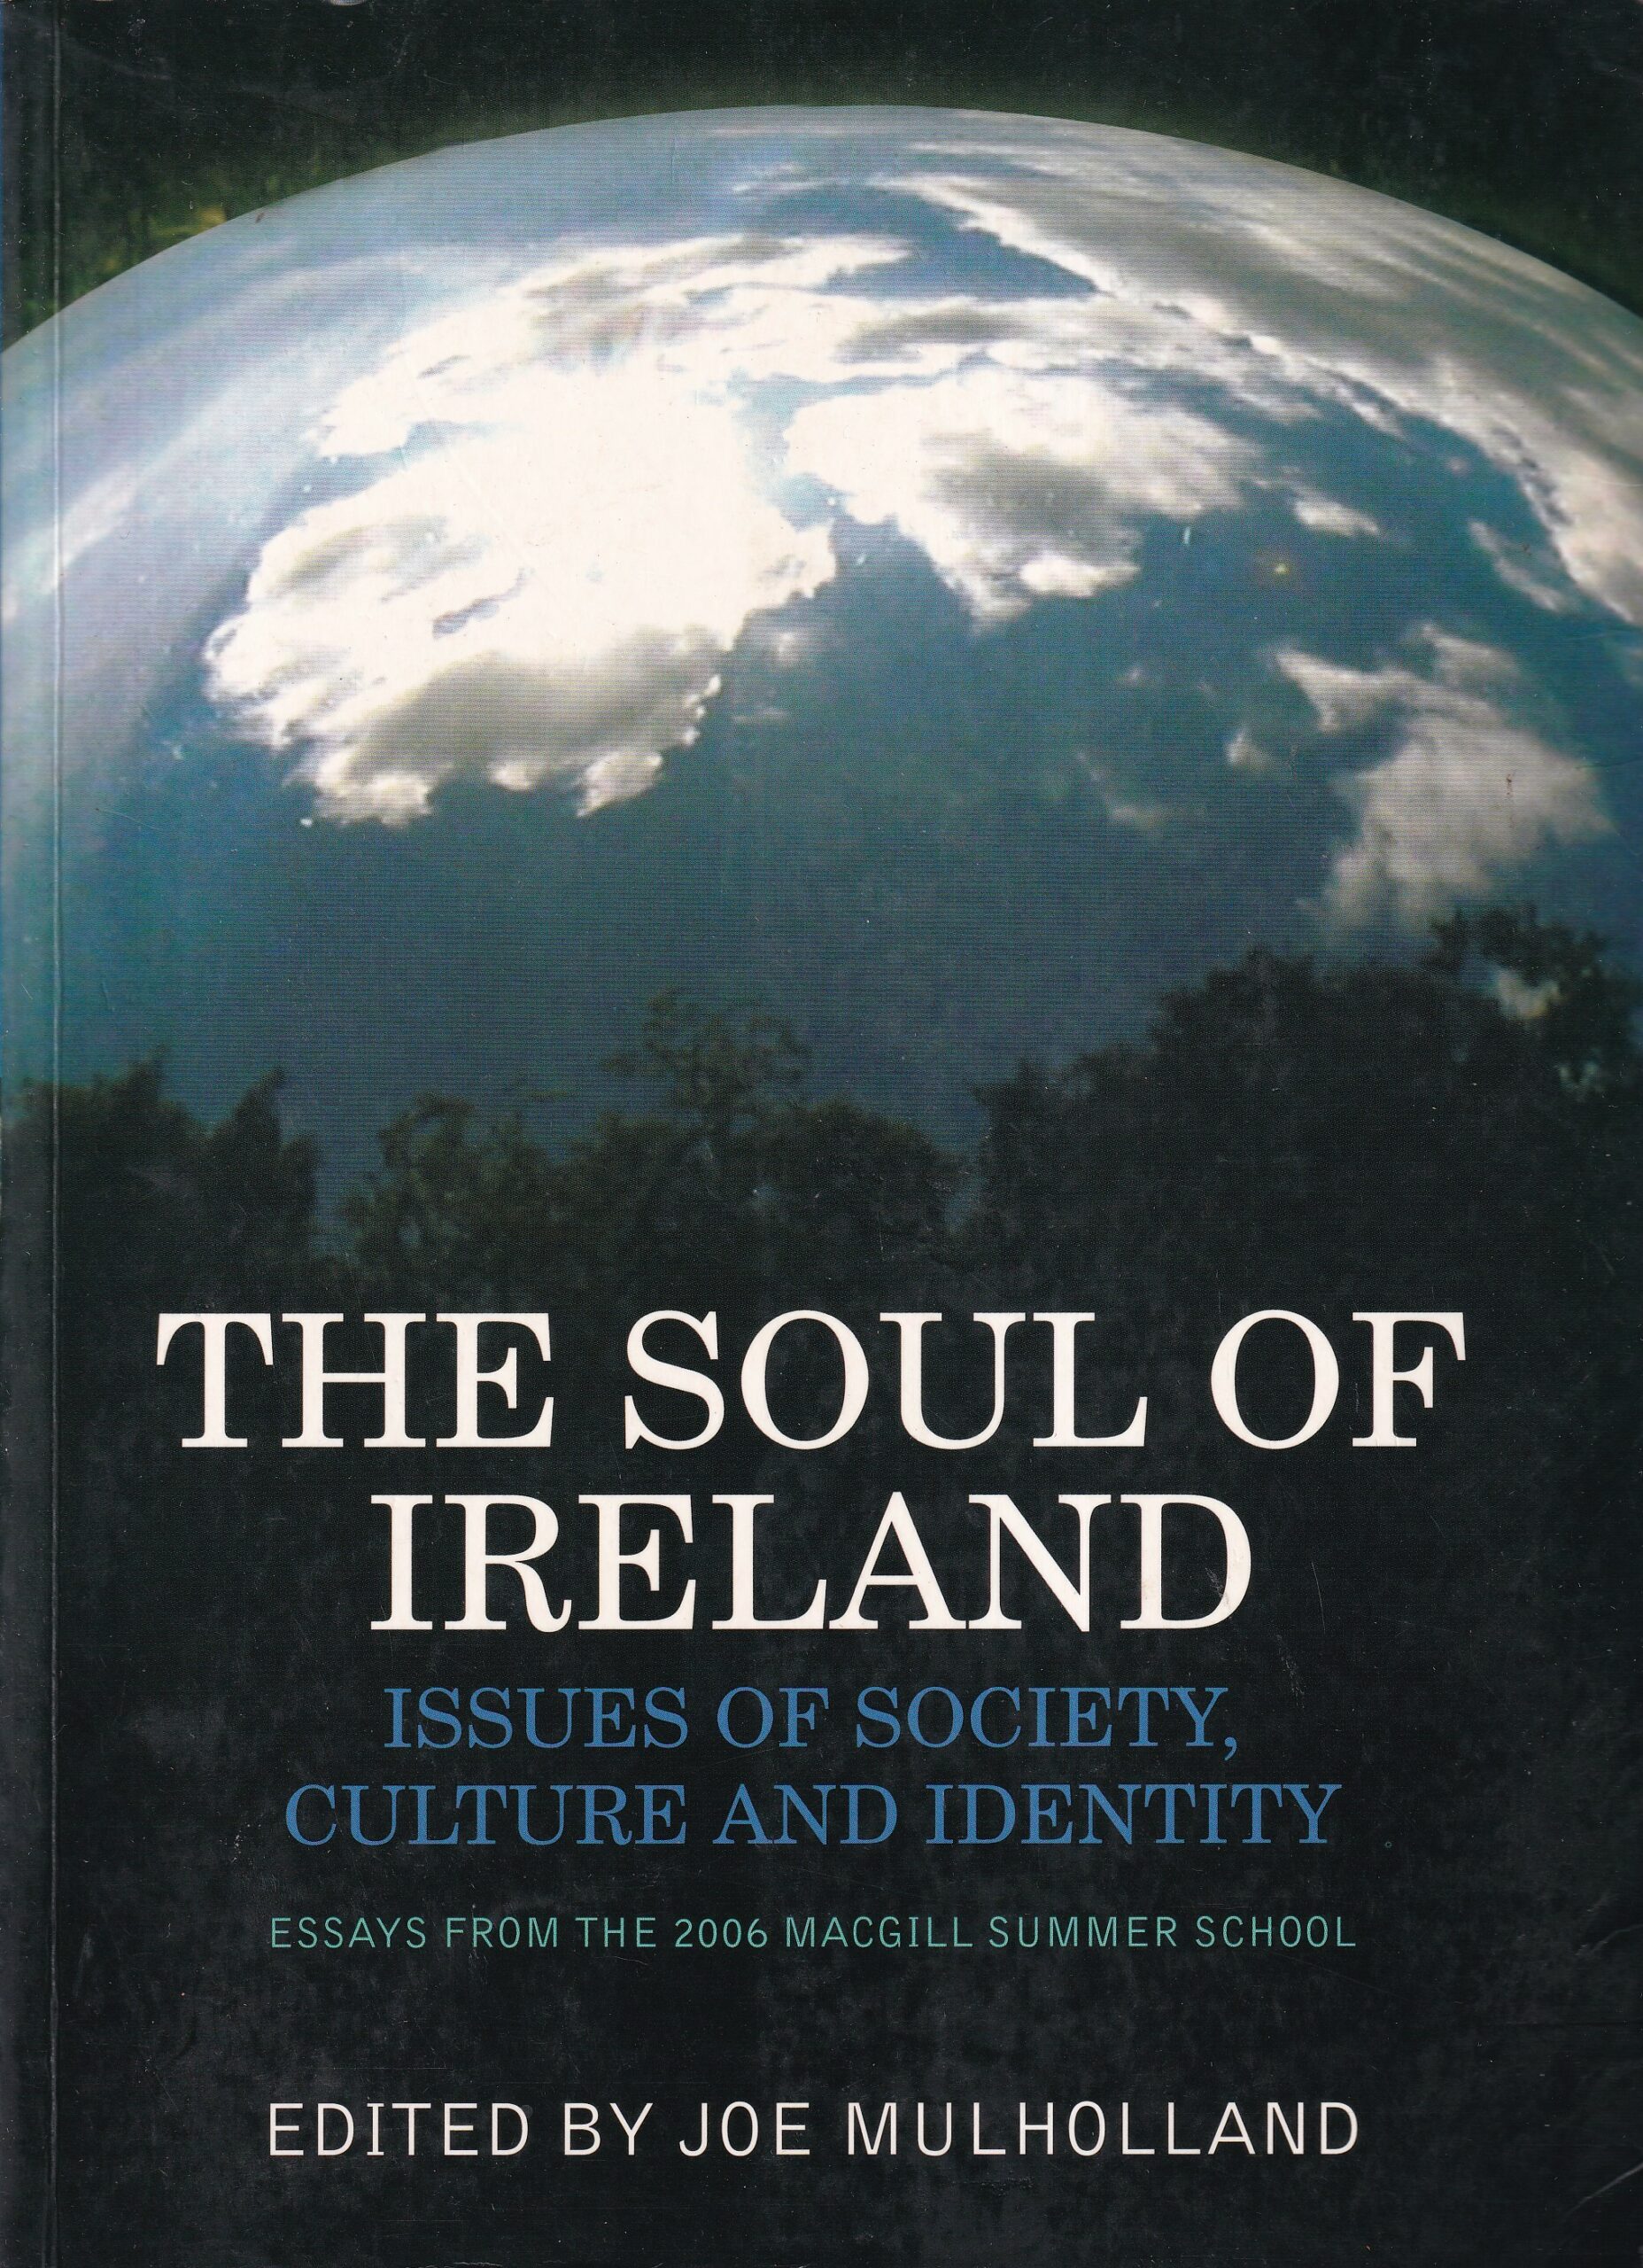 The Soul of Ireland: Issues of Society, Culture and Identity- Essays from the 2006 MacGill Summer School | Joe Mulholland (ed.) | Charlie Byrne's